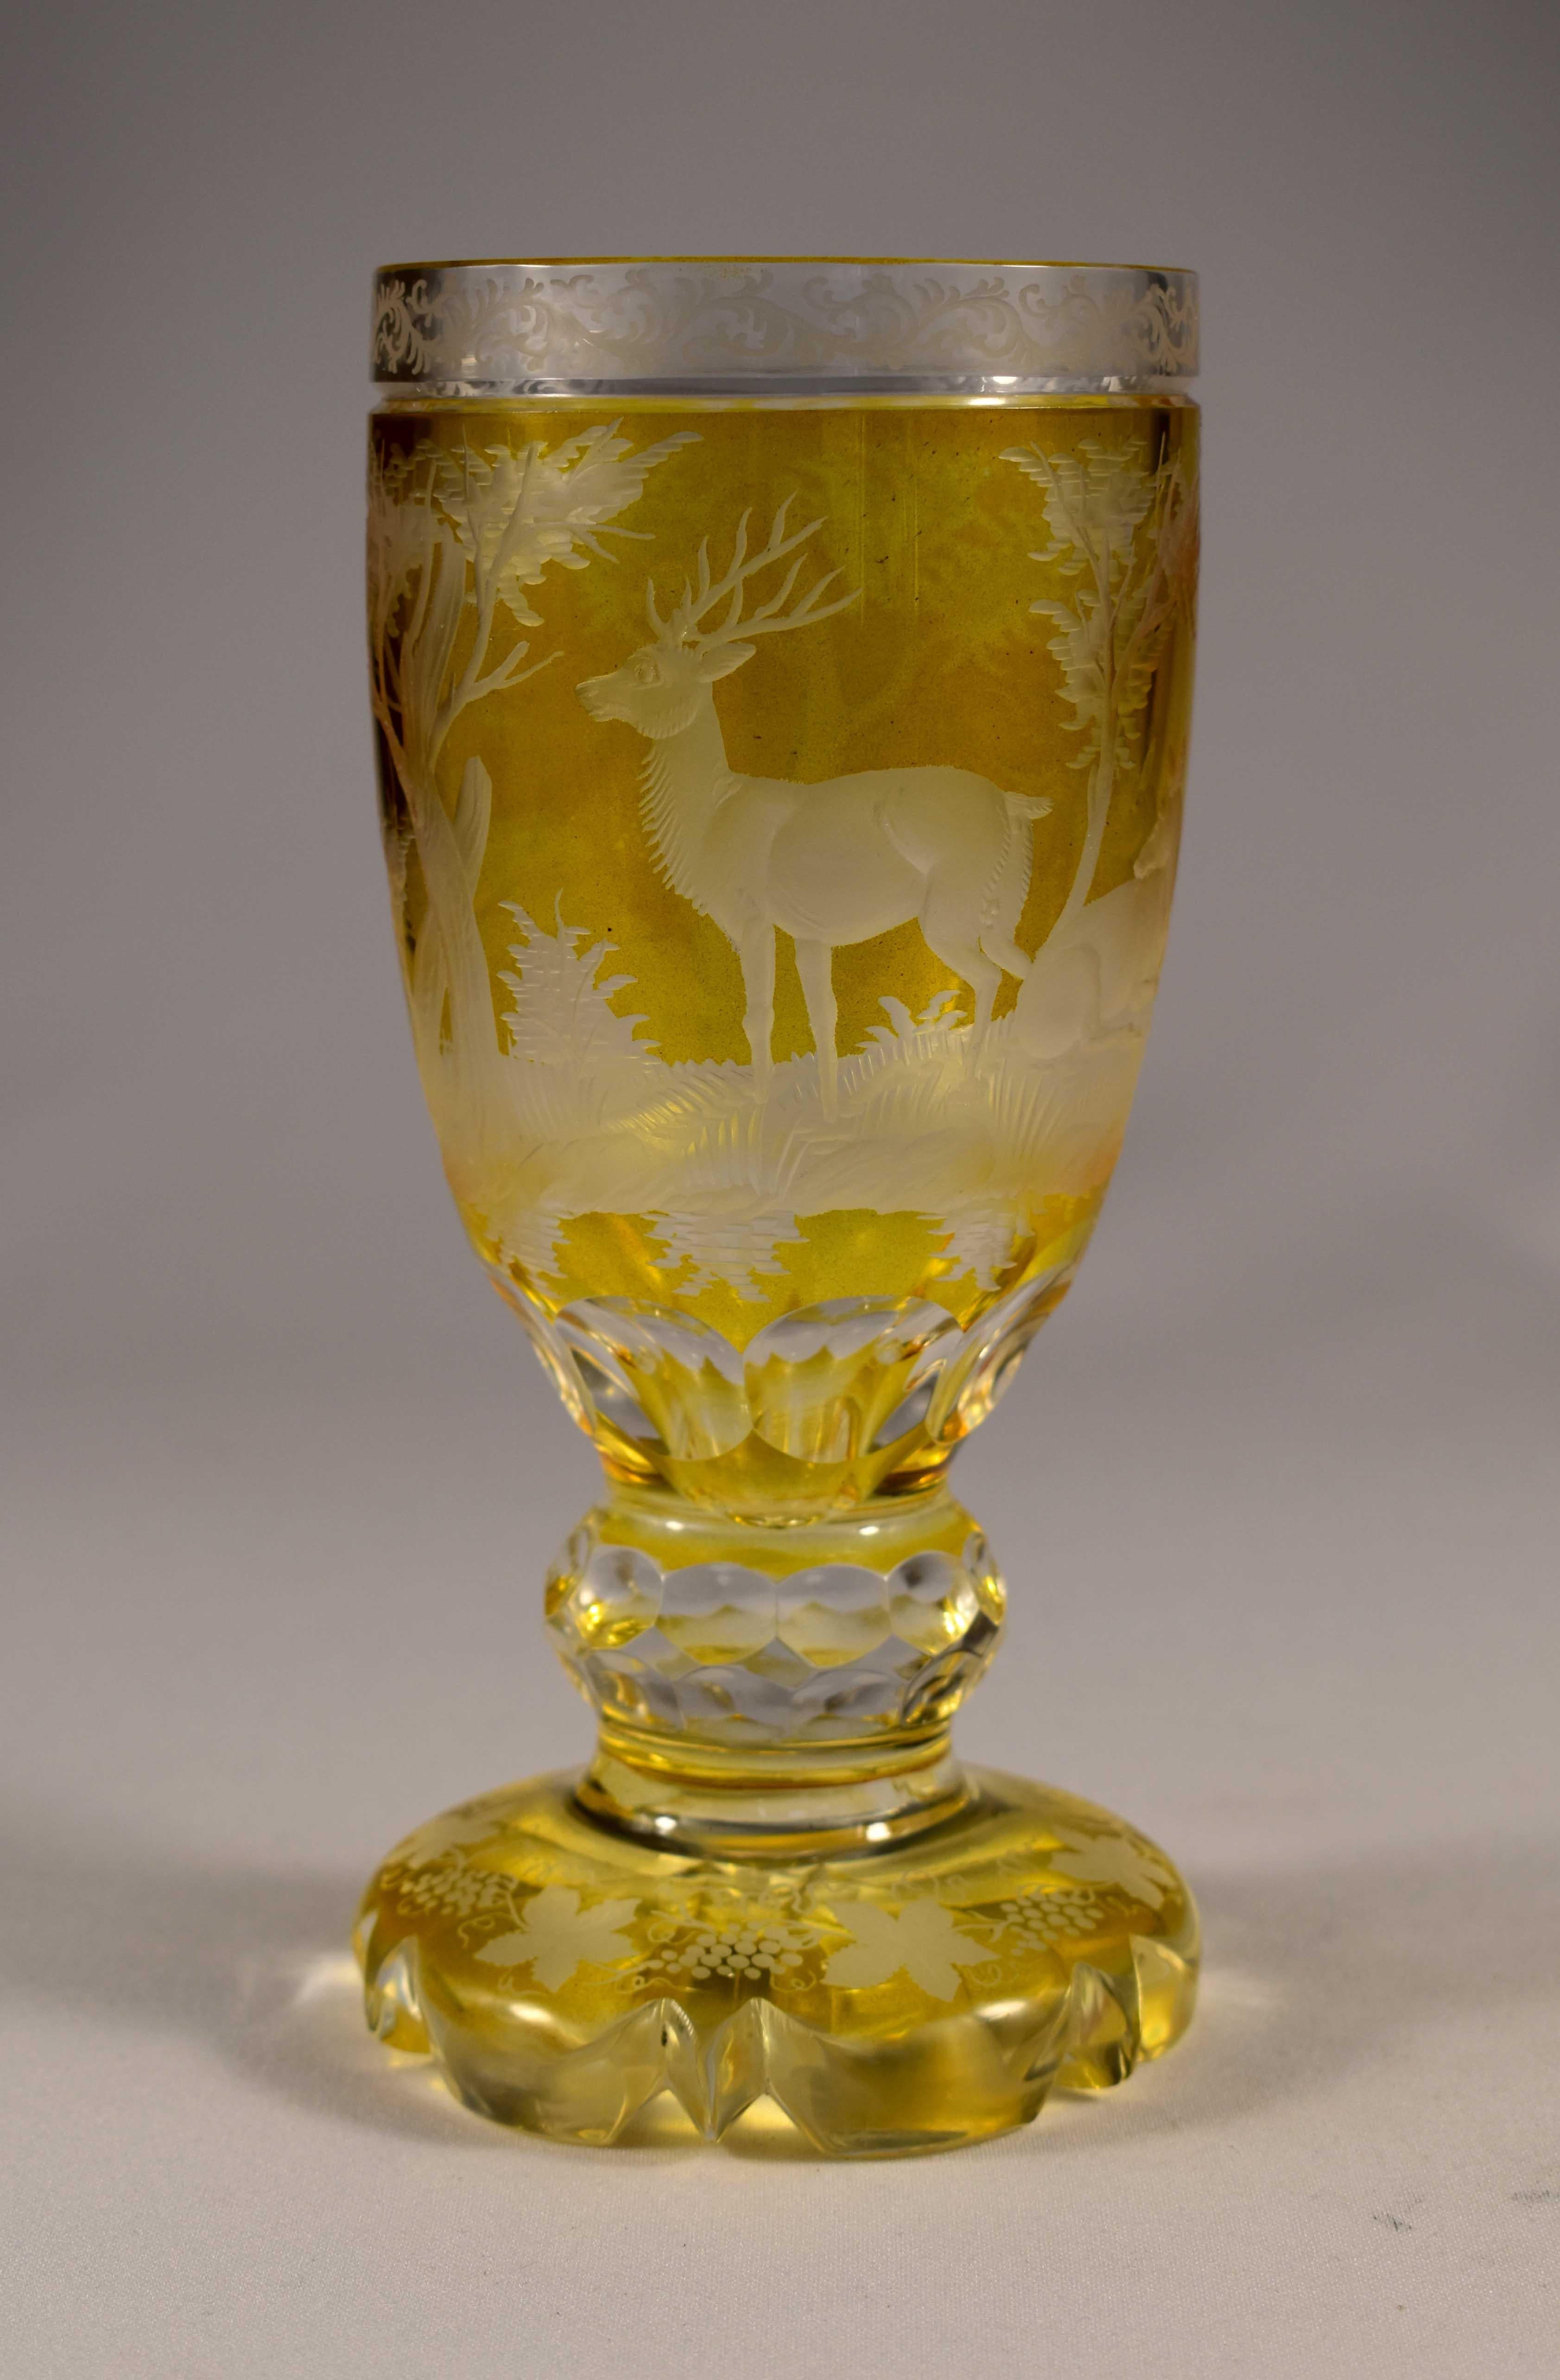 Beautiful cut and engraved cup, overlaid yellow lazura, engraved hunting motif, 20th century Bohemian glass.